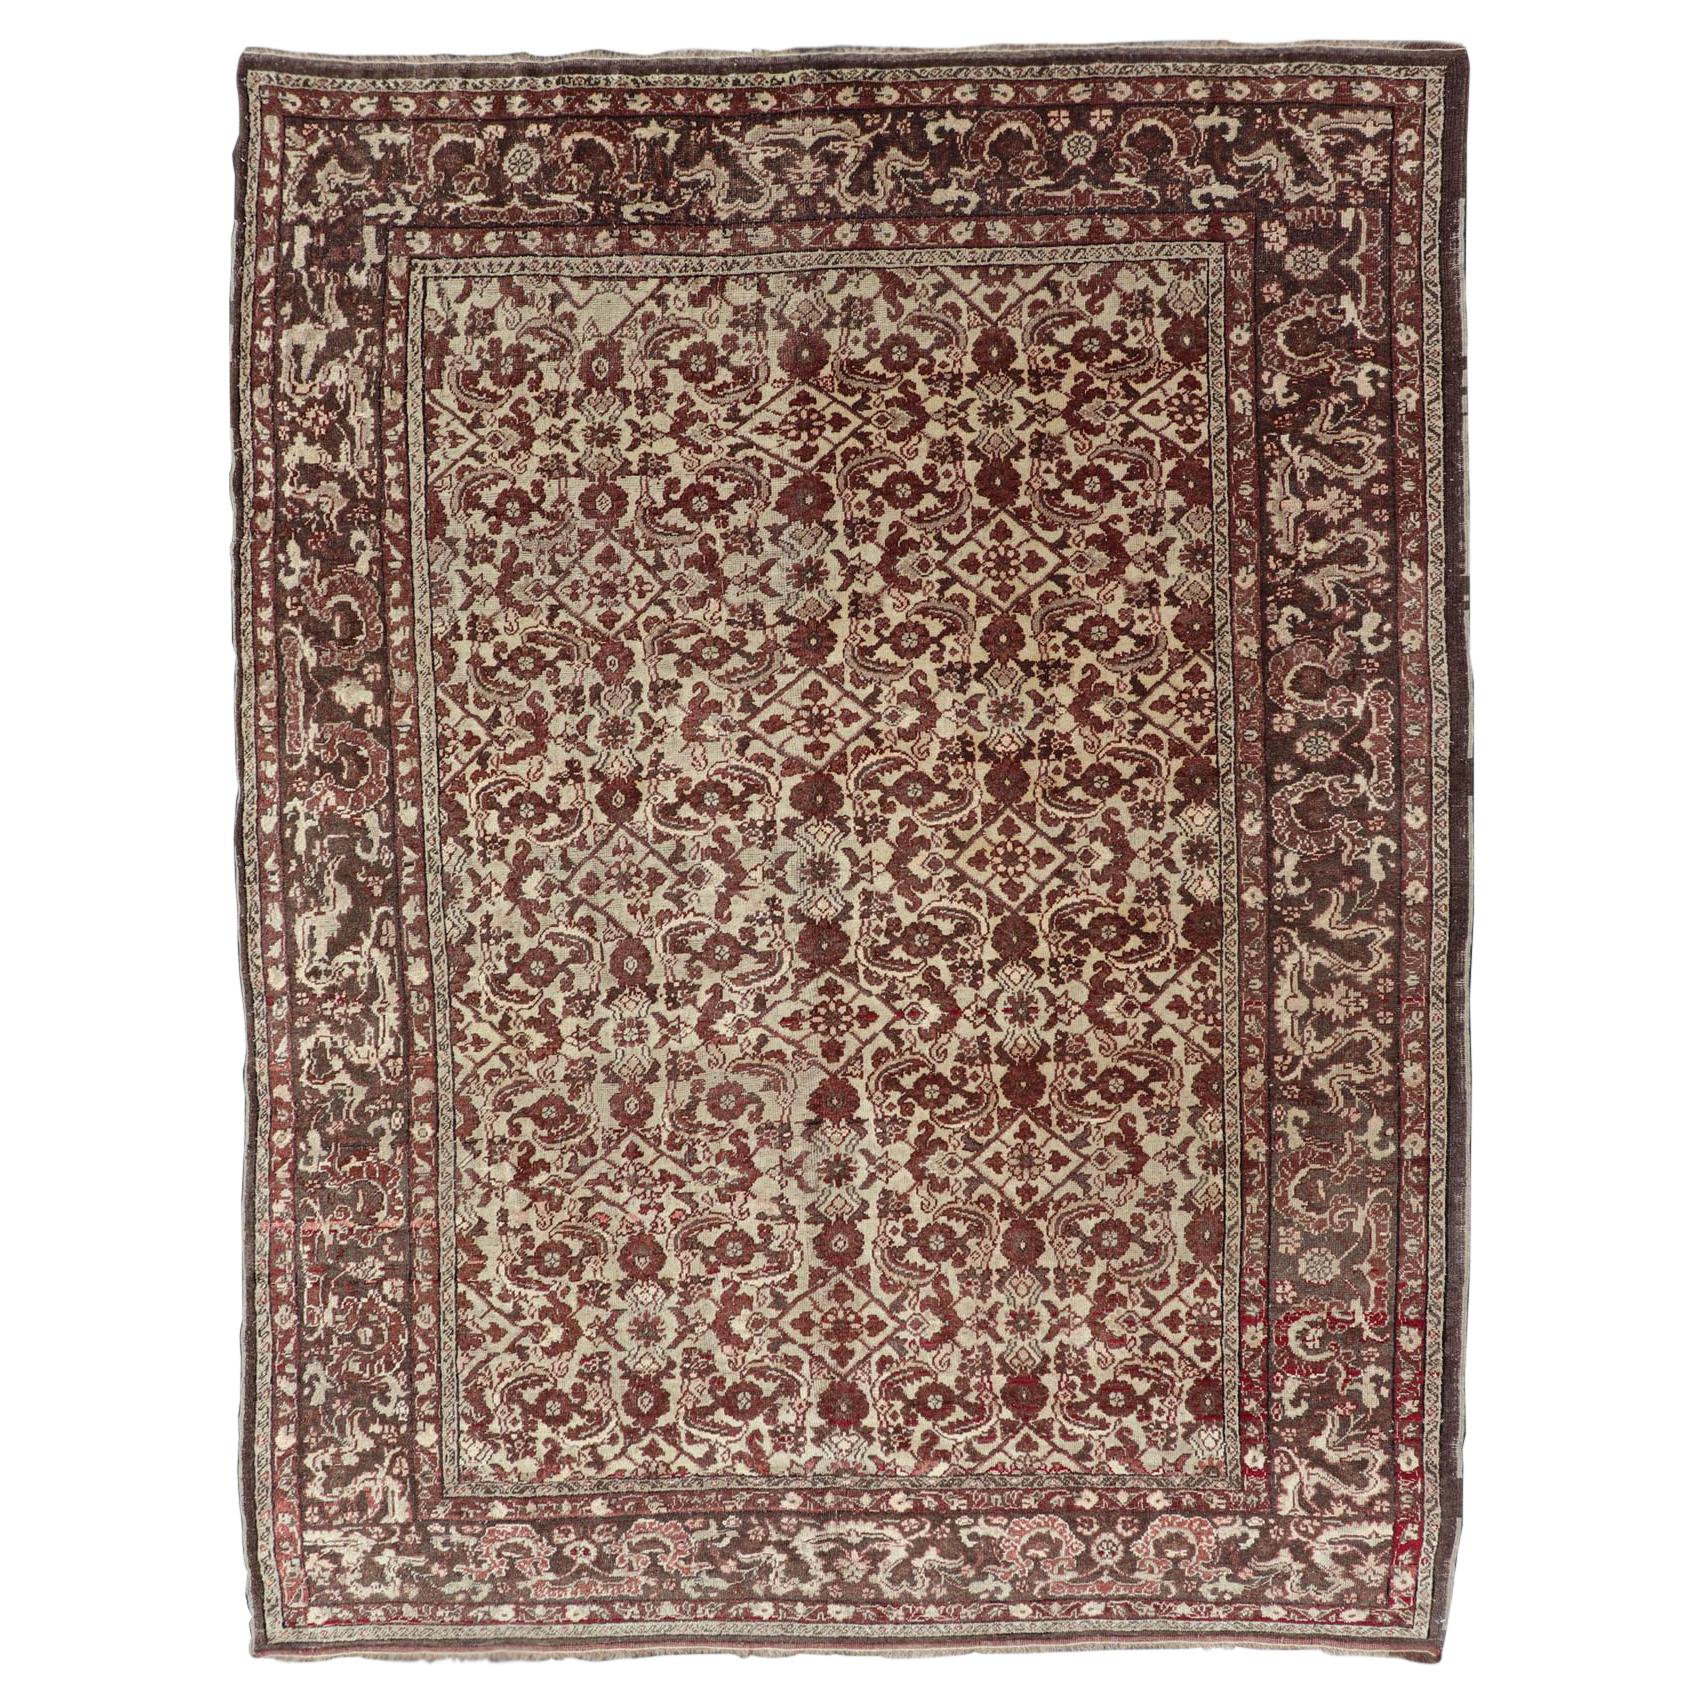 Antique Turkish Sivas Rug with Tan Background and Maroon, Eggplant, Brown Color  For Sale